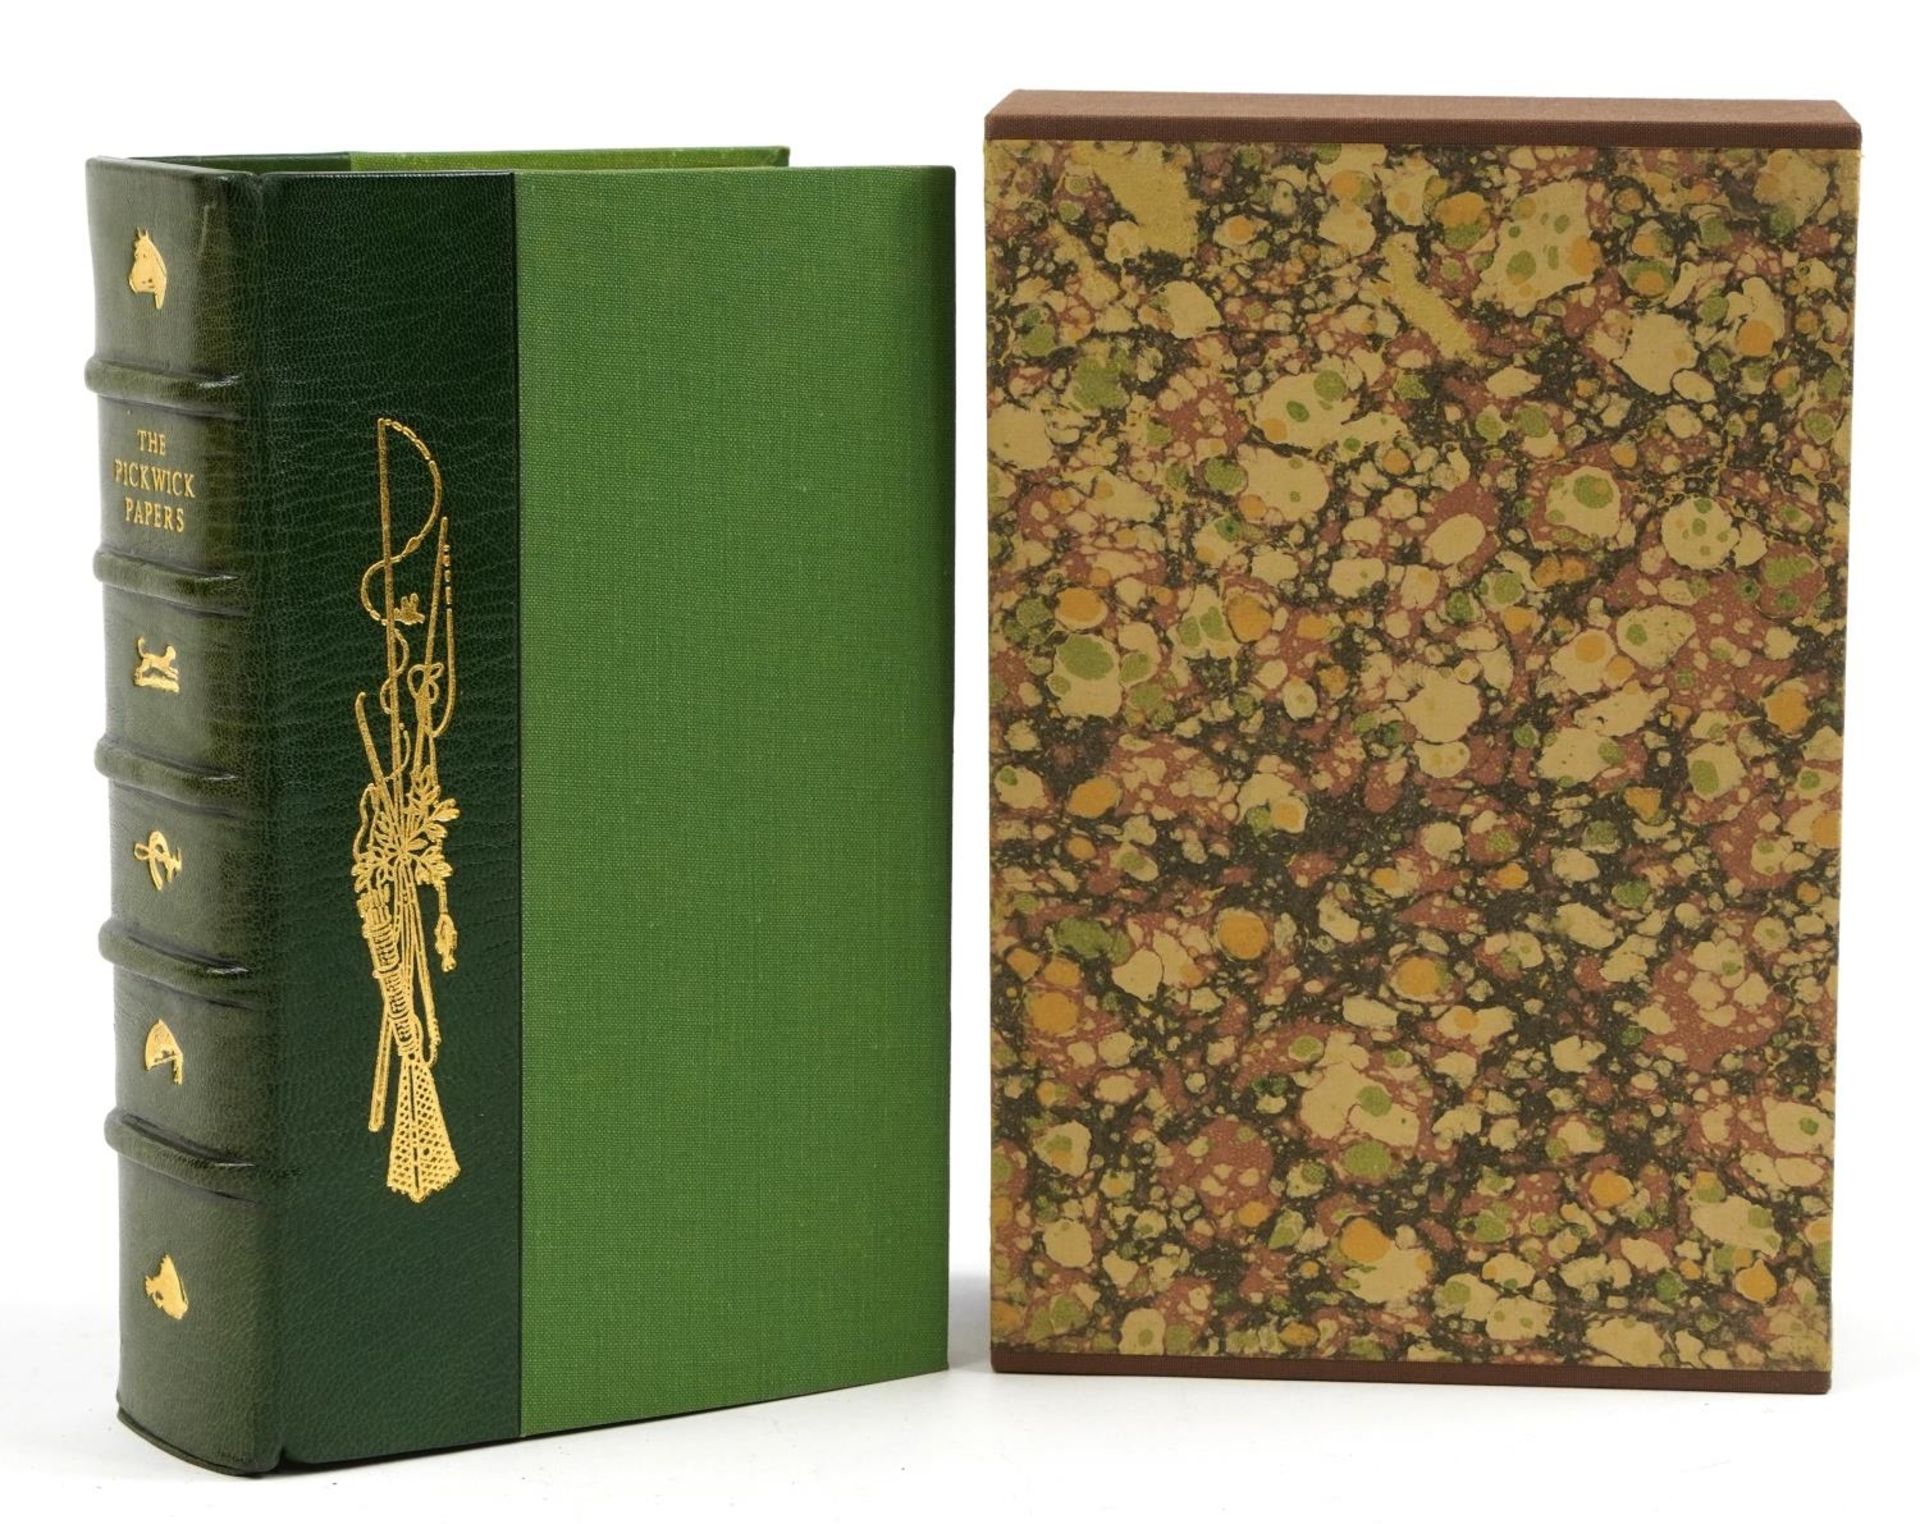 The Pickwick Papers, leather bound, gilt edged book, Nottingham Court press in association with